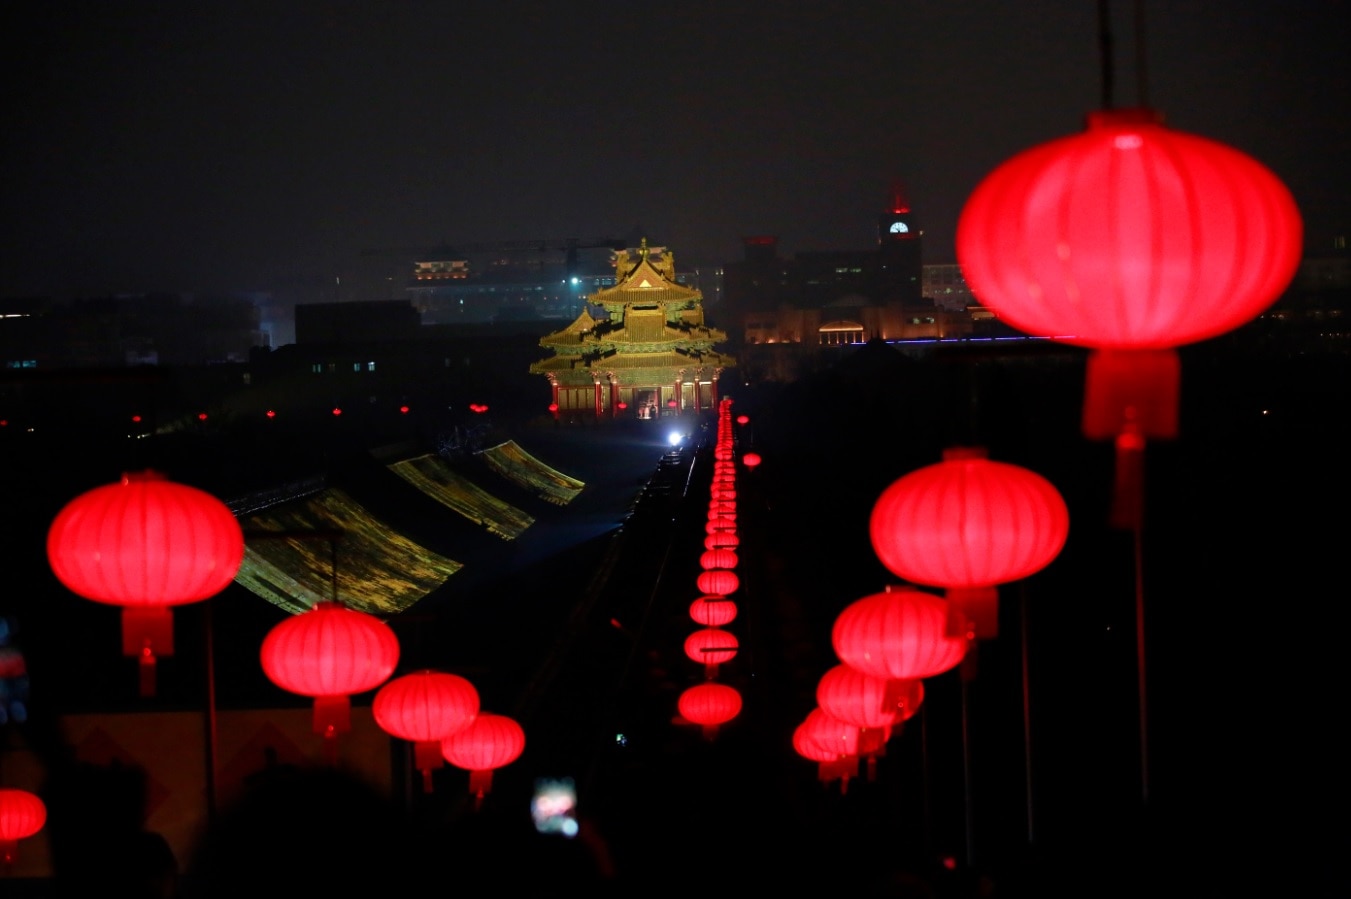 In this Tuesday, Feb. 19, 2019, photo, lanterns is decorated near a Turret of the Forbidden City projected with lights for the Lantern Festival in Beijing.